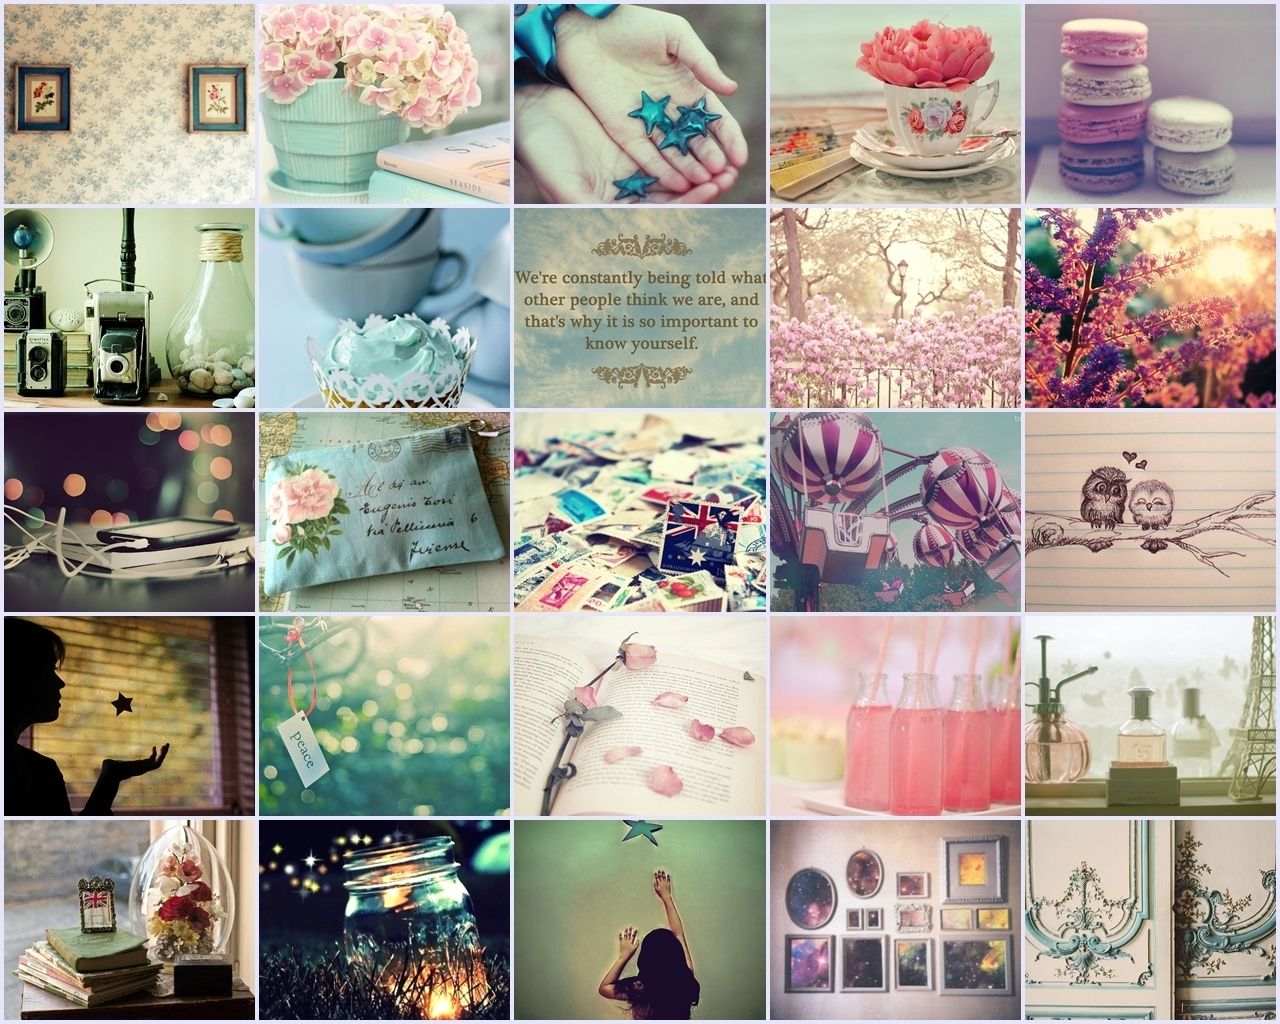 Girly Facebook Background. Girly Wallpaper, Cute Girly Wallpaper and Vintage Girly Wallpaper